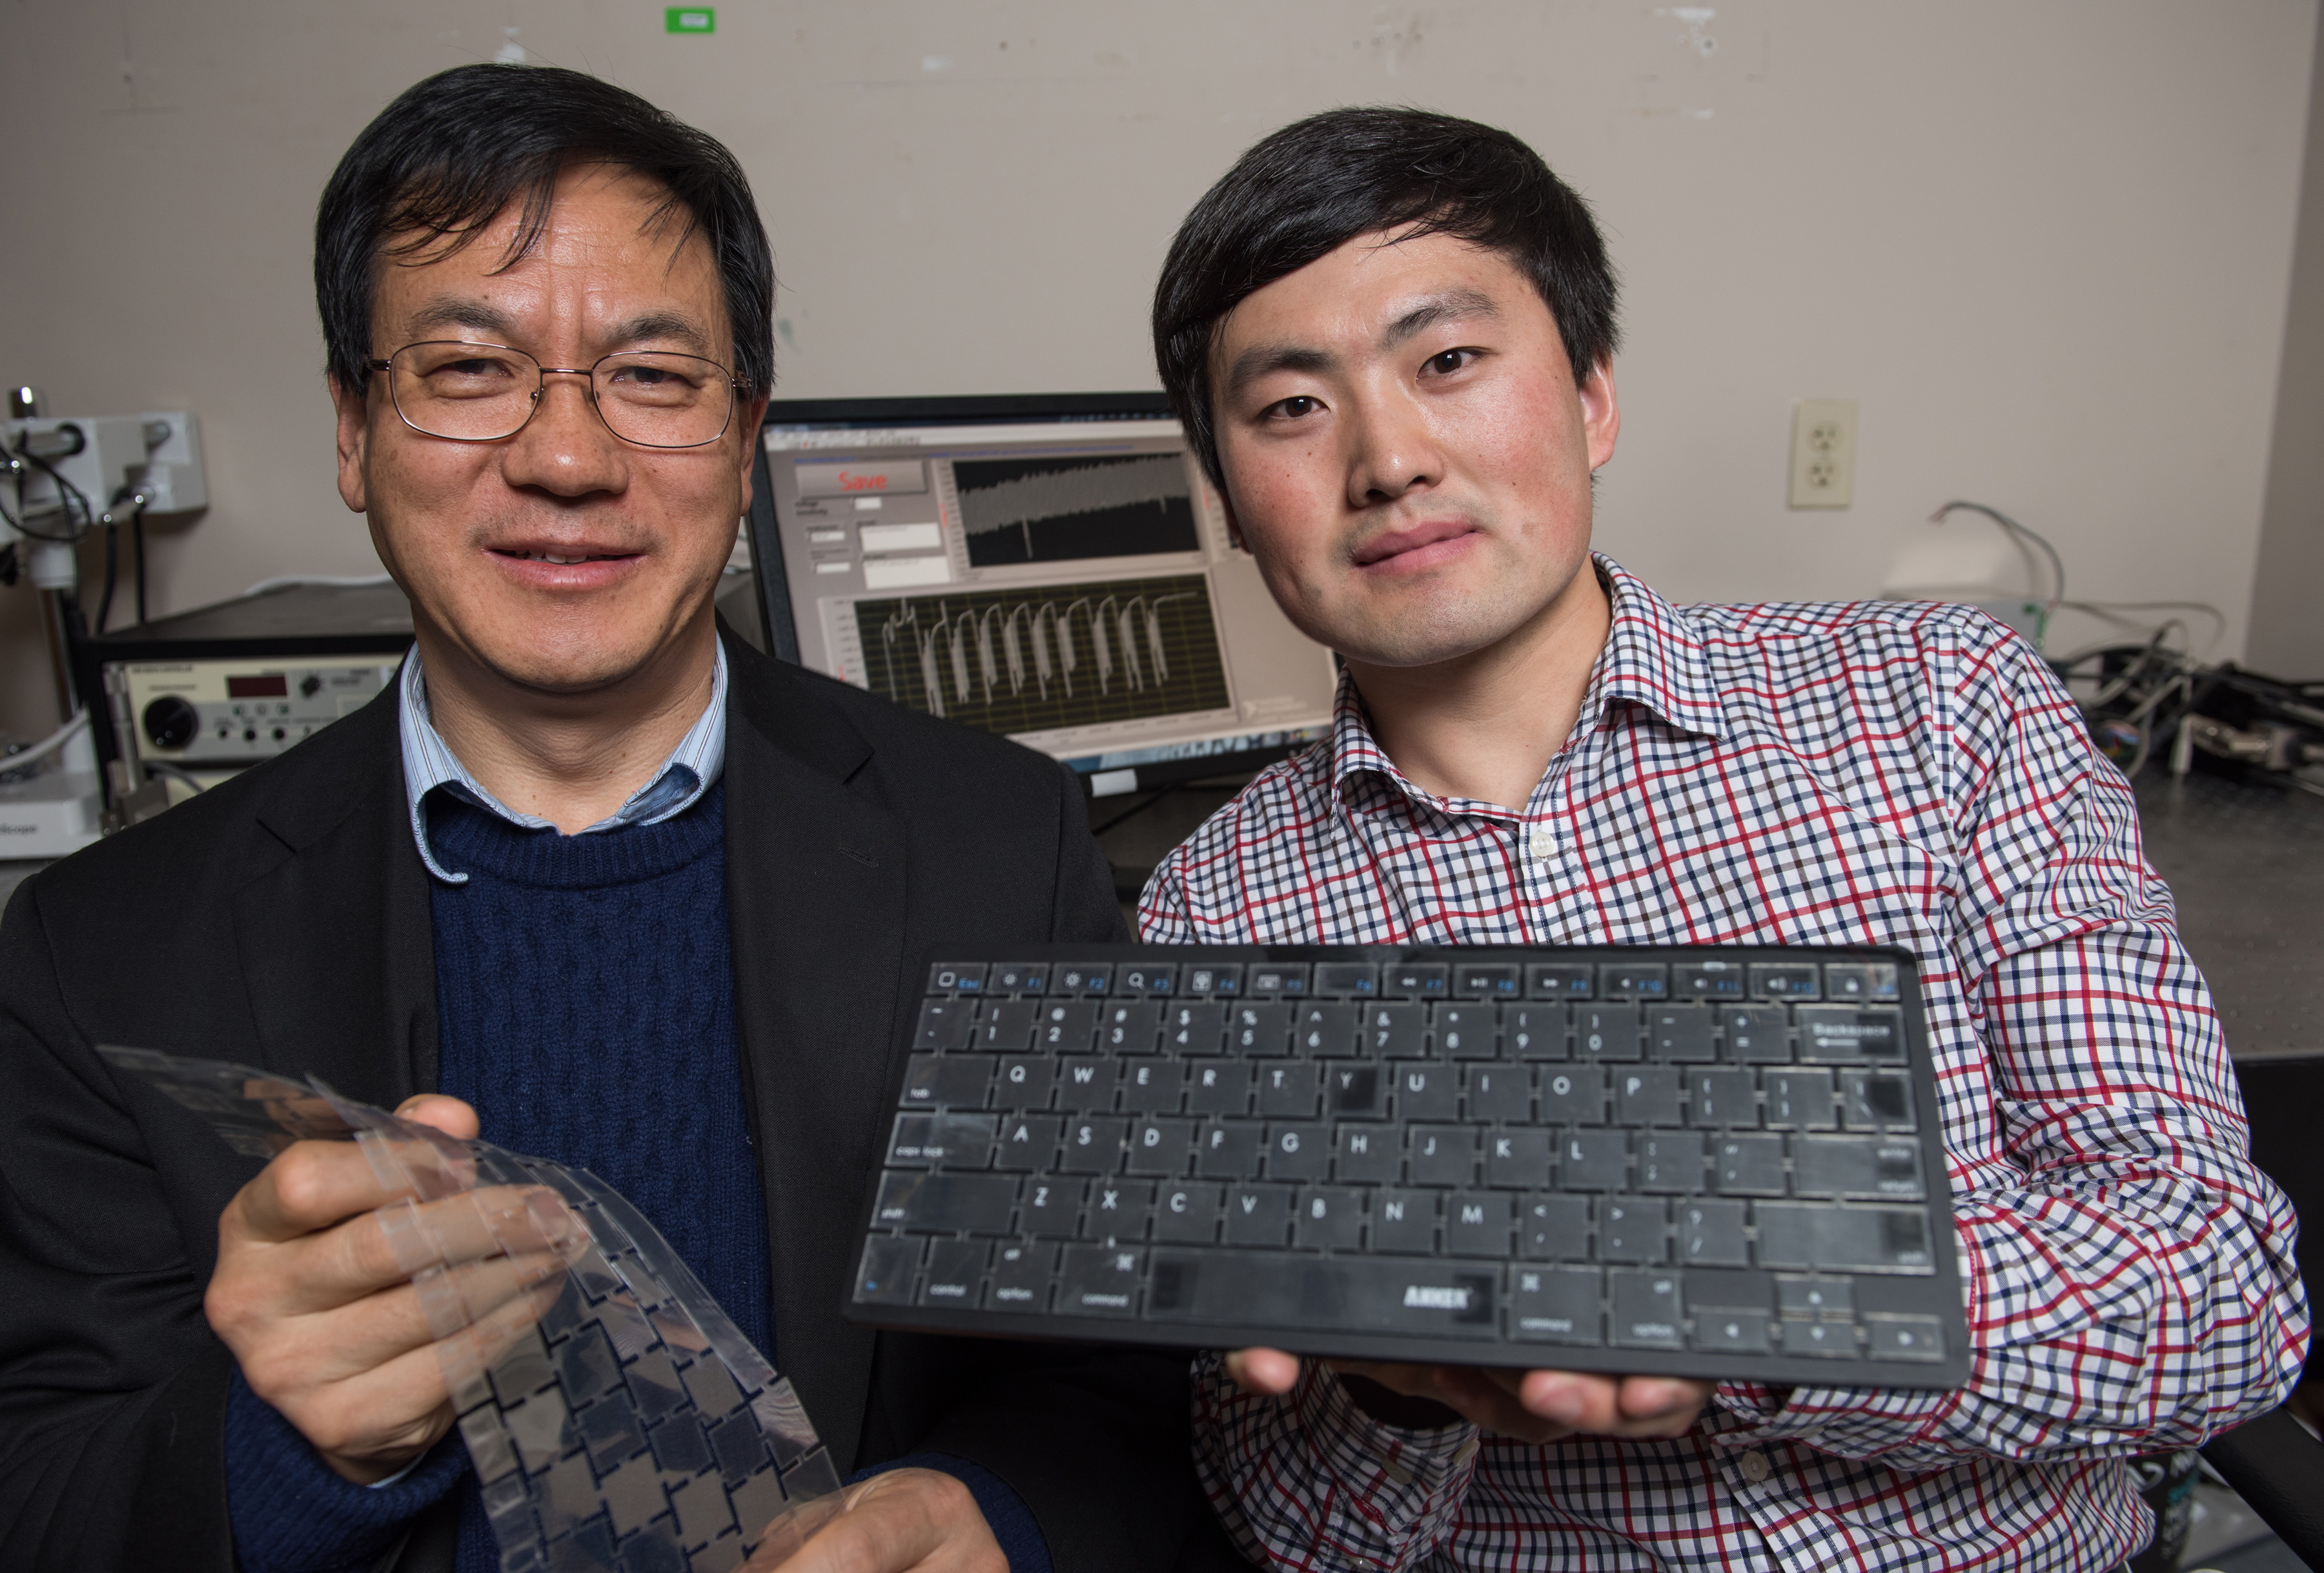 Georgia Tech Professor Zhong Lin Wang (left) and graduate research assistant Jun Chen display their new self-powered keyboard. The device could provide a stronger layer of security for computer users. (Credit: Rob Felt)